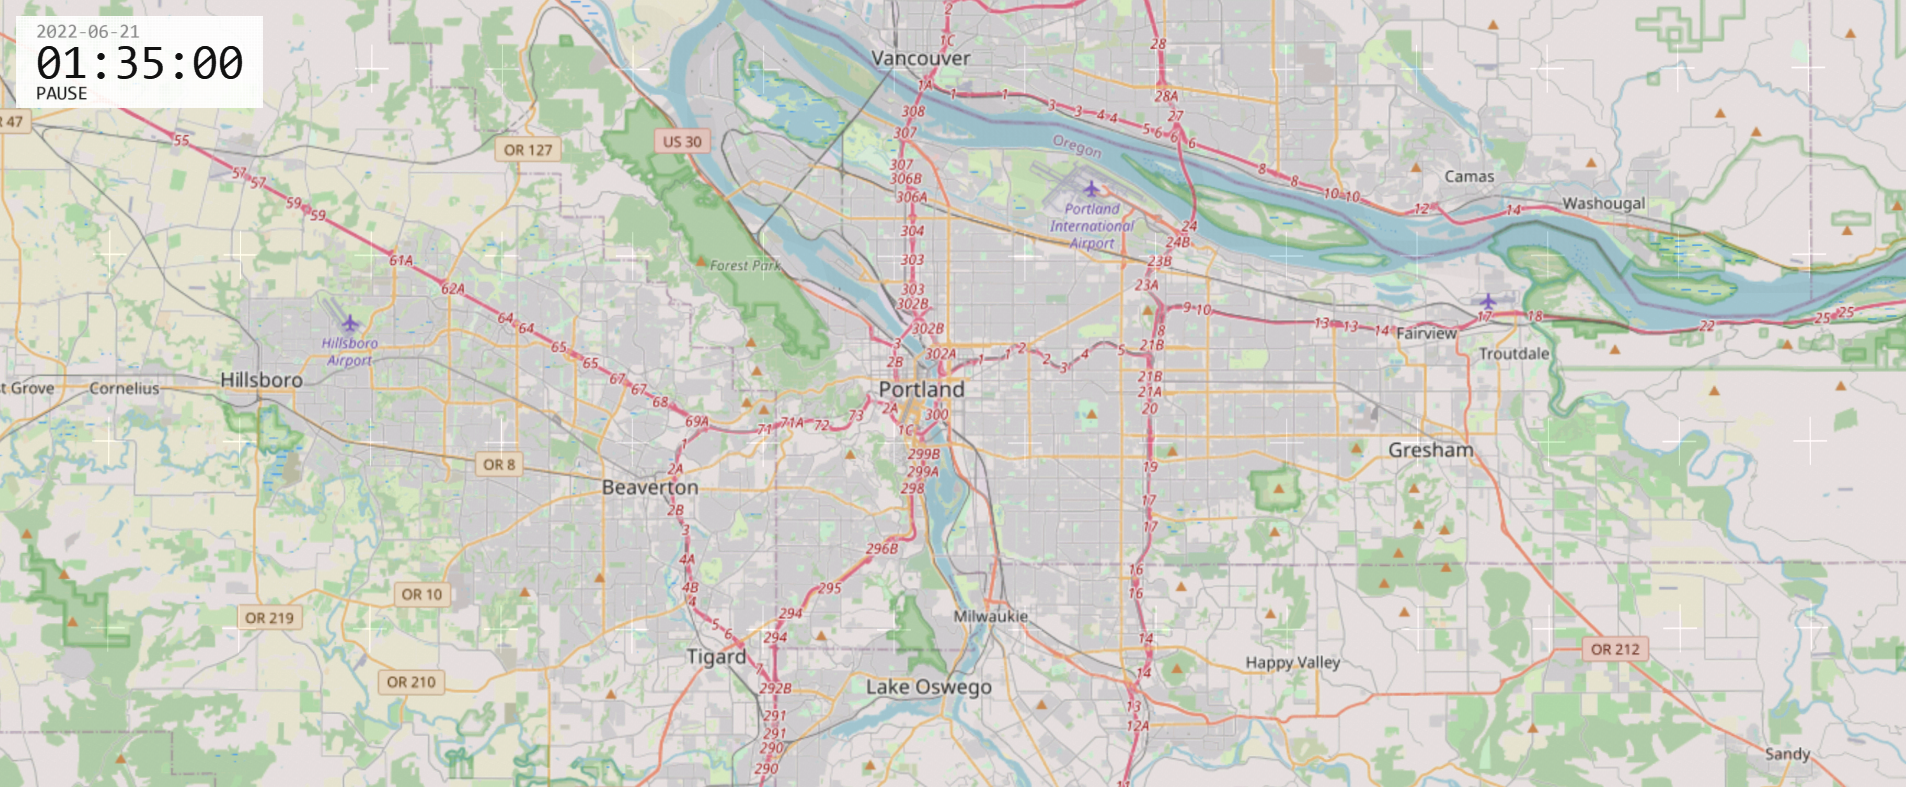 Mapview 1.4.7 (by Jacques ‘Detox’ Deyrieux) is now available.